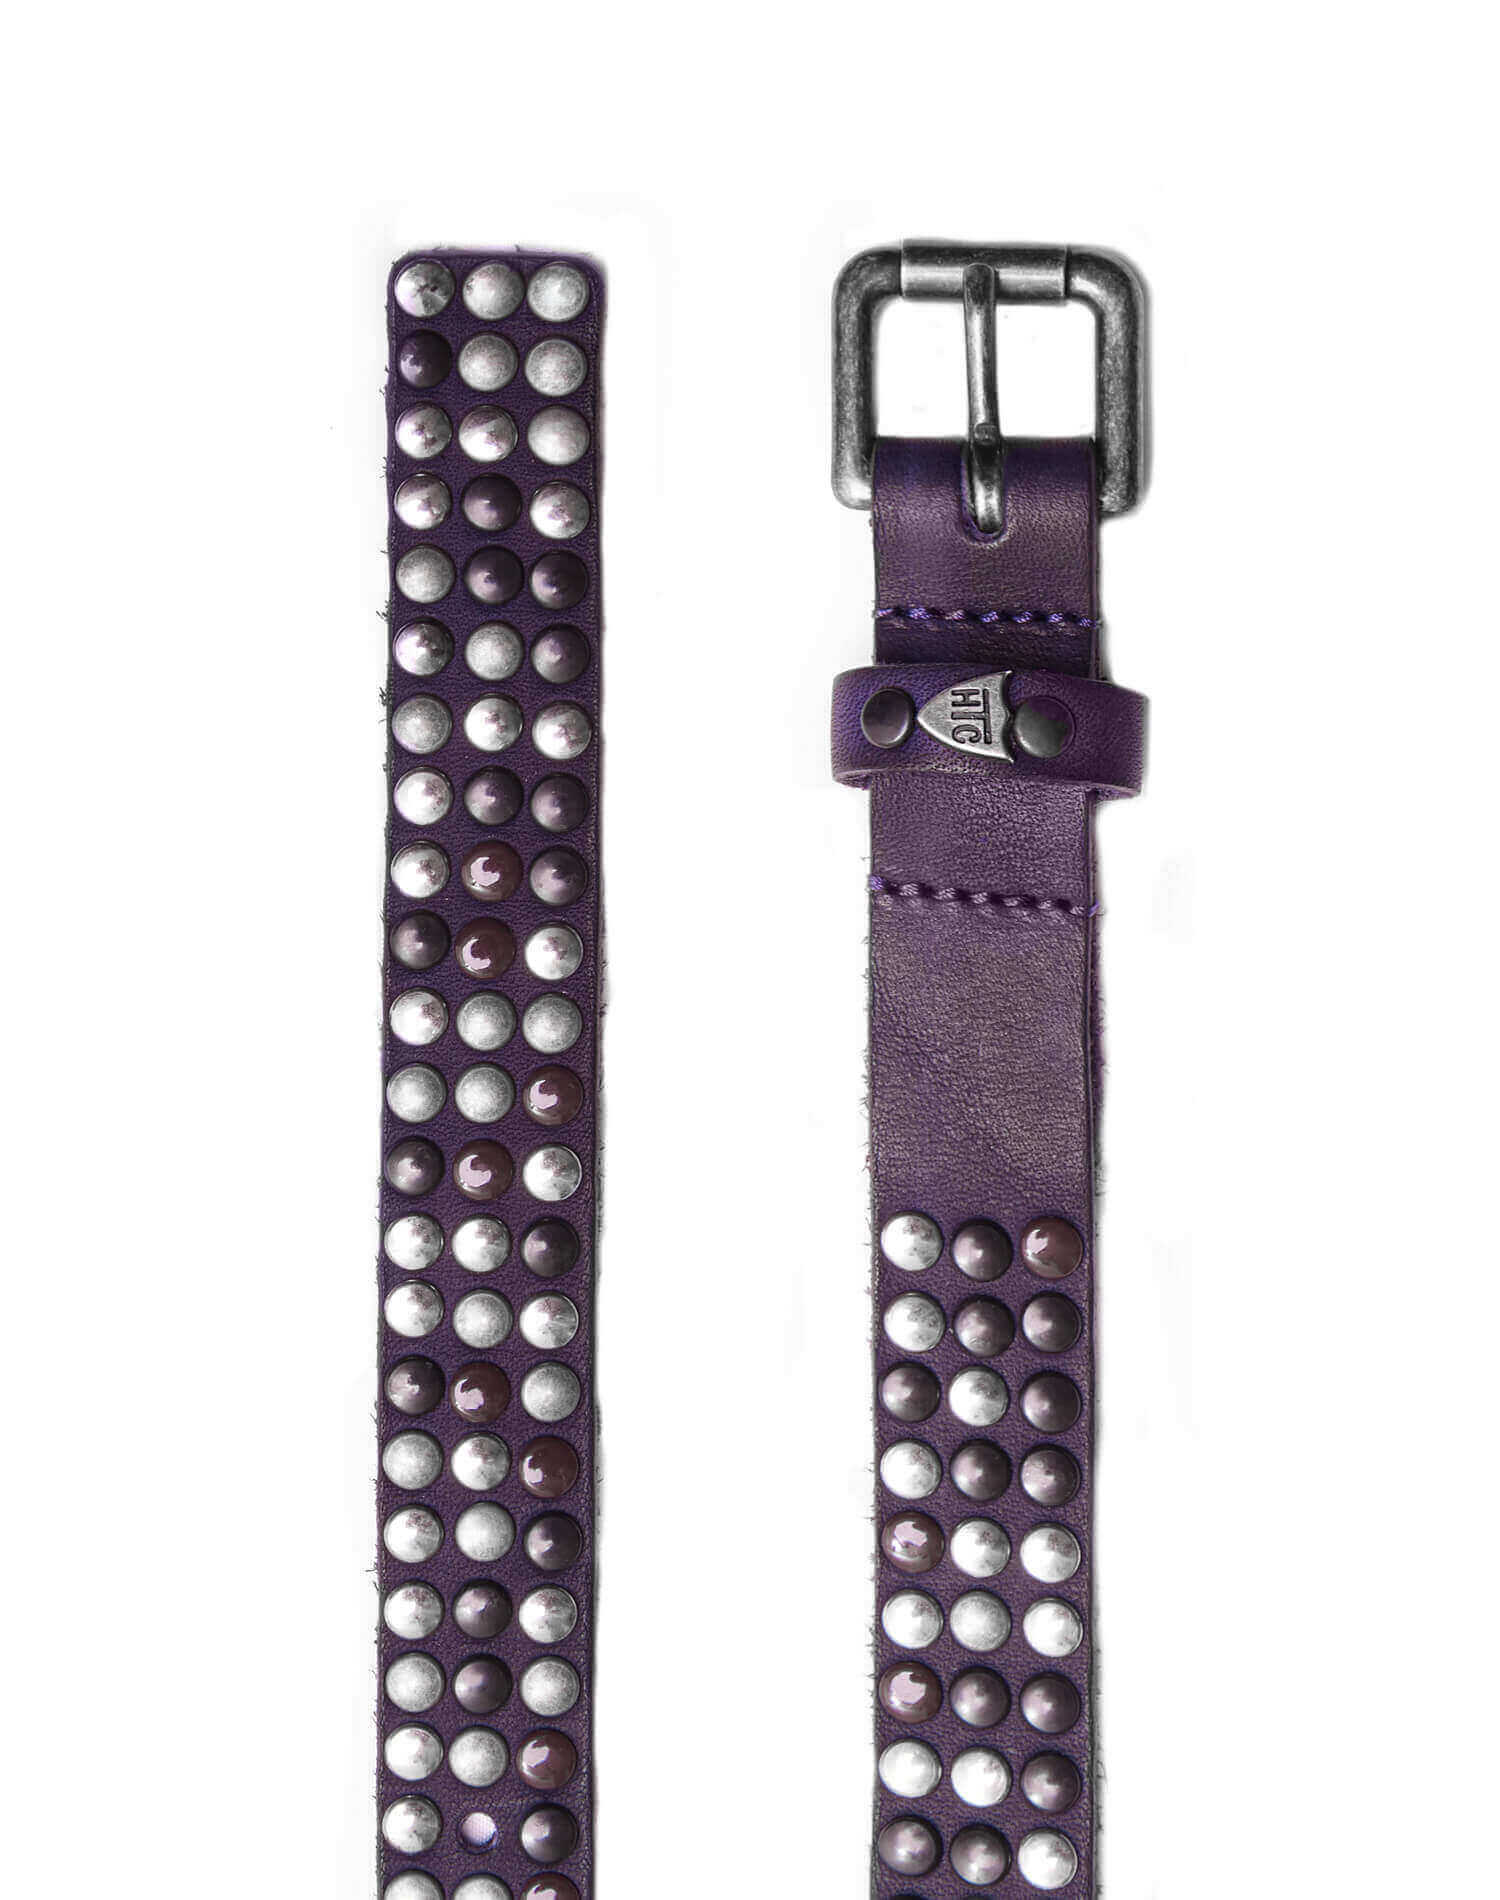 3.000 STUDS VARNISH BELT Violet leather belt with studs, brass buckle, studded zamac belt loop and rivet with HTC logo. Height: 2 cm. Made in Italy. HTC LOS ANGELES